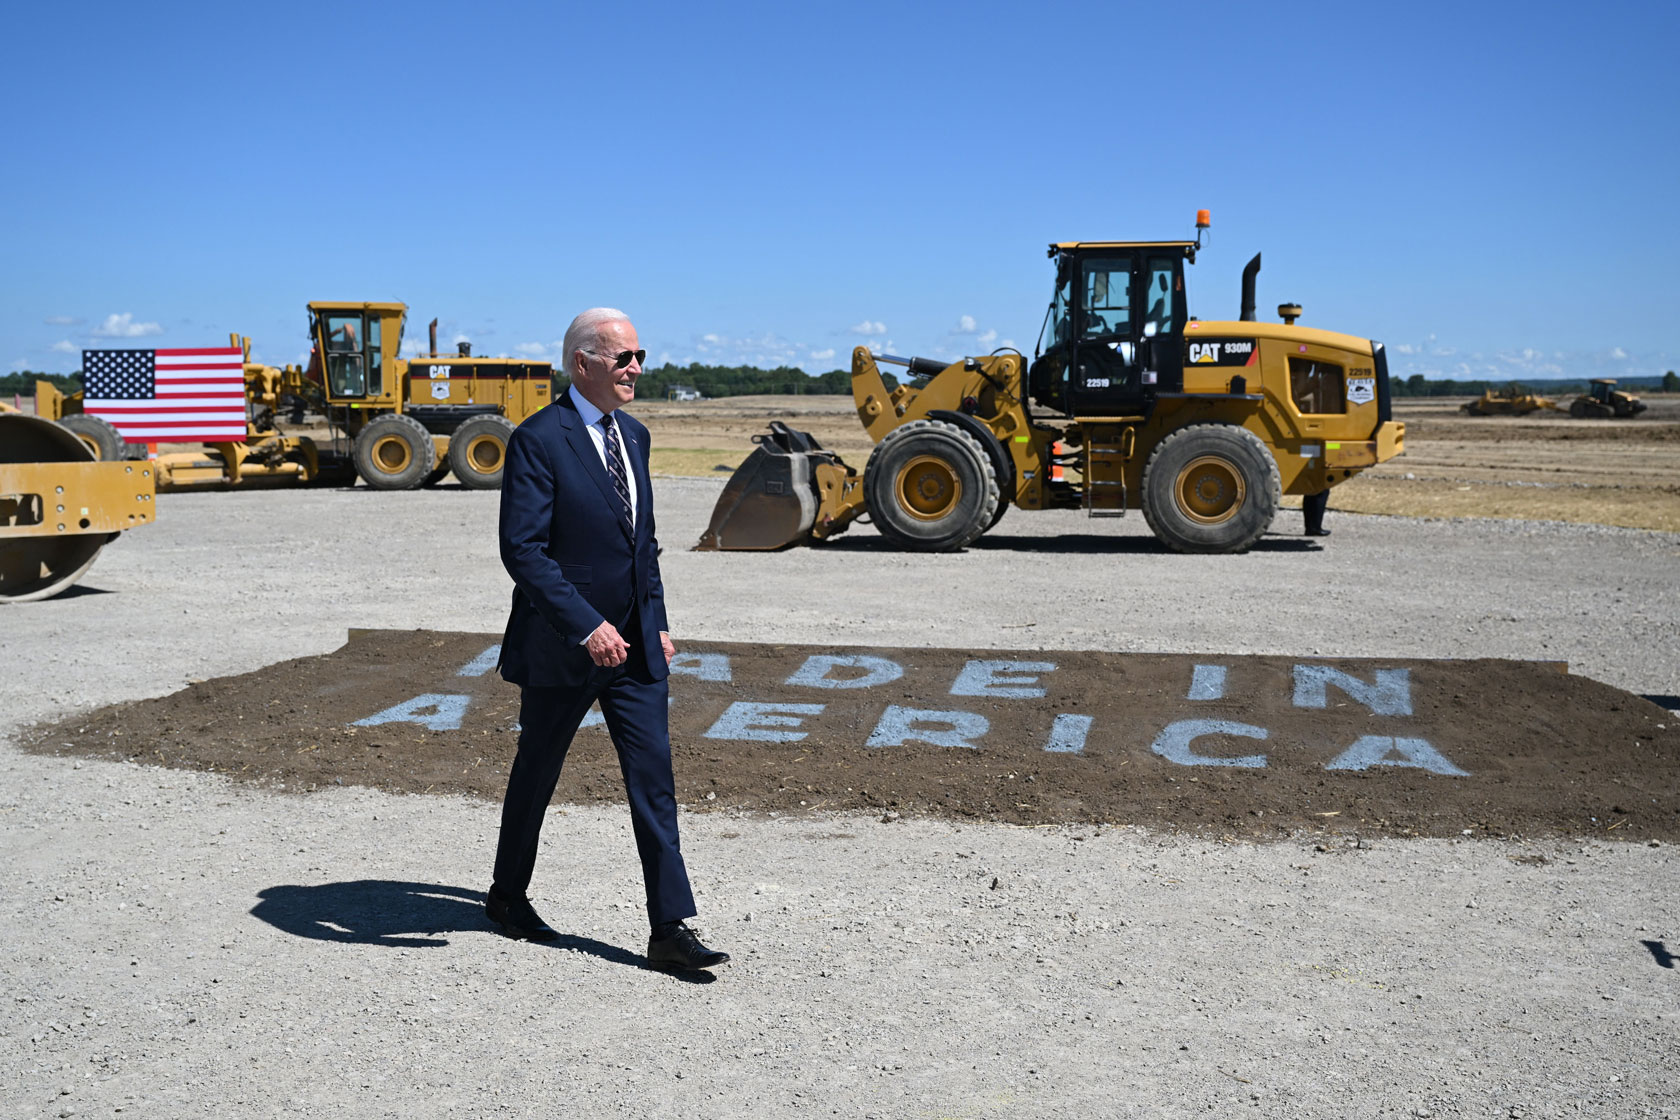 Photo shows Joe Biden walking in front of a construction site with yellow construction machinery in the background, and a 